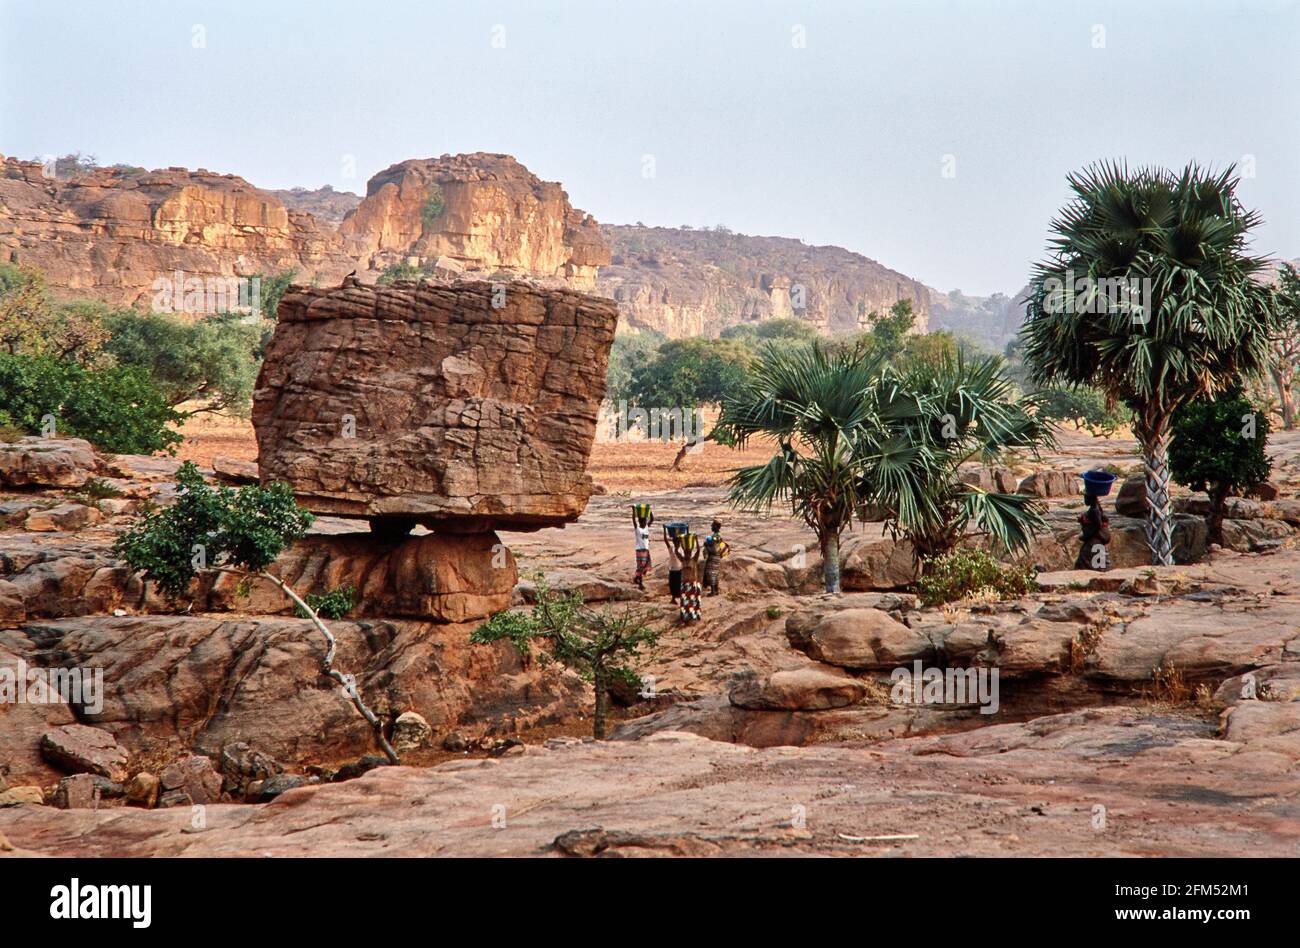 Strange rock formation in front of the Falaise de Bandiagara. In between Dogon women carrying baskets on their heads.  08.11.2003 - Christoiph Keller Stock Photo